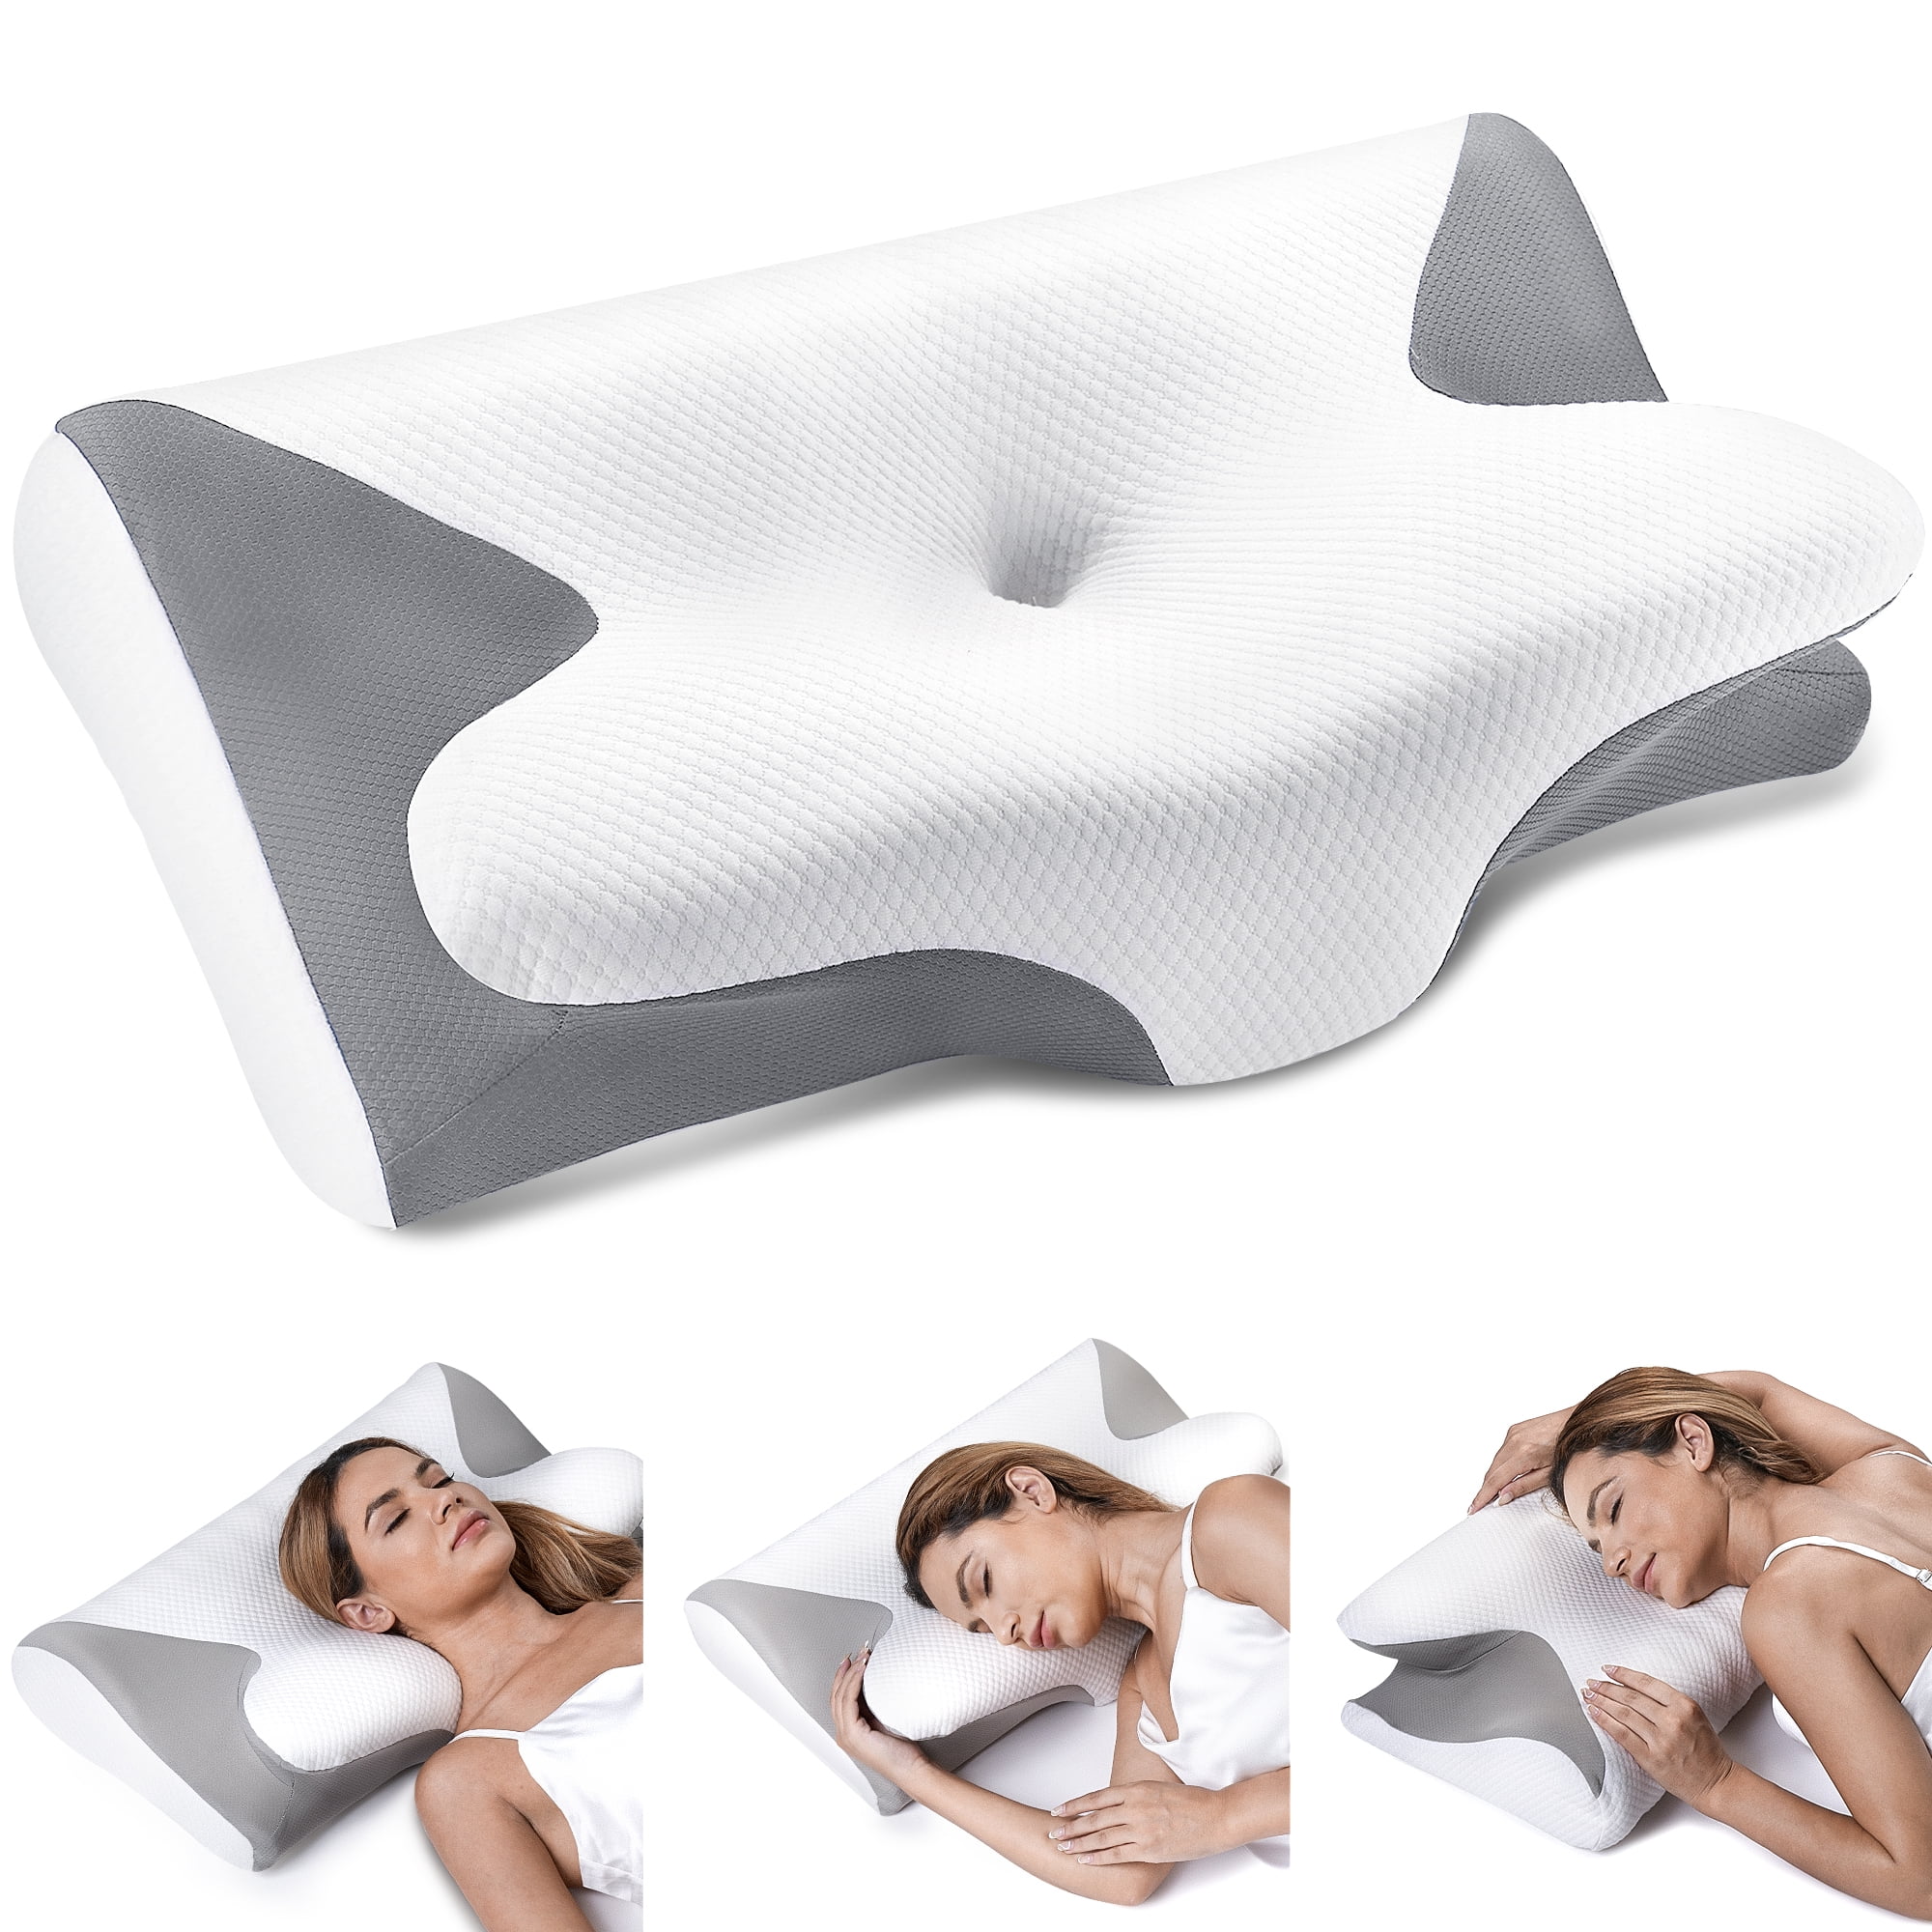 Cushion Lab Extra Dense Ergonomic Cervical Pillow for Firm Neck Support -  Orthopedic Contour Pillow for Back/Side Sleeper Neck Relief, CertiPUR–US  Memory Foam Pillow W/Organic Cotton Cover 